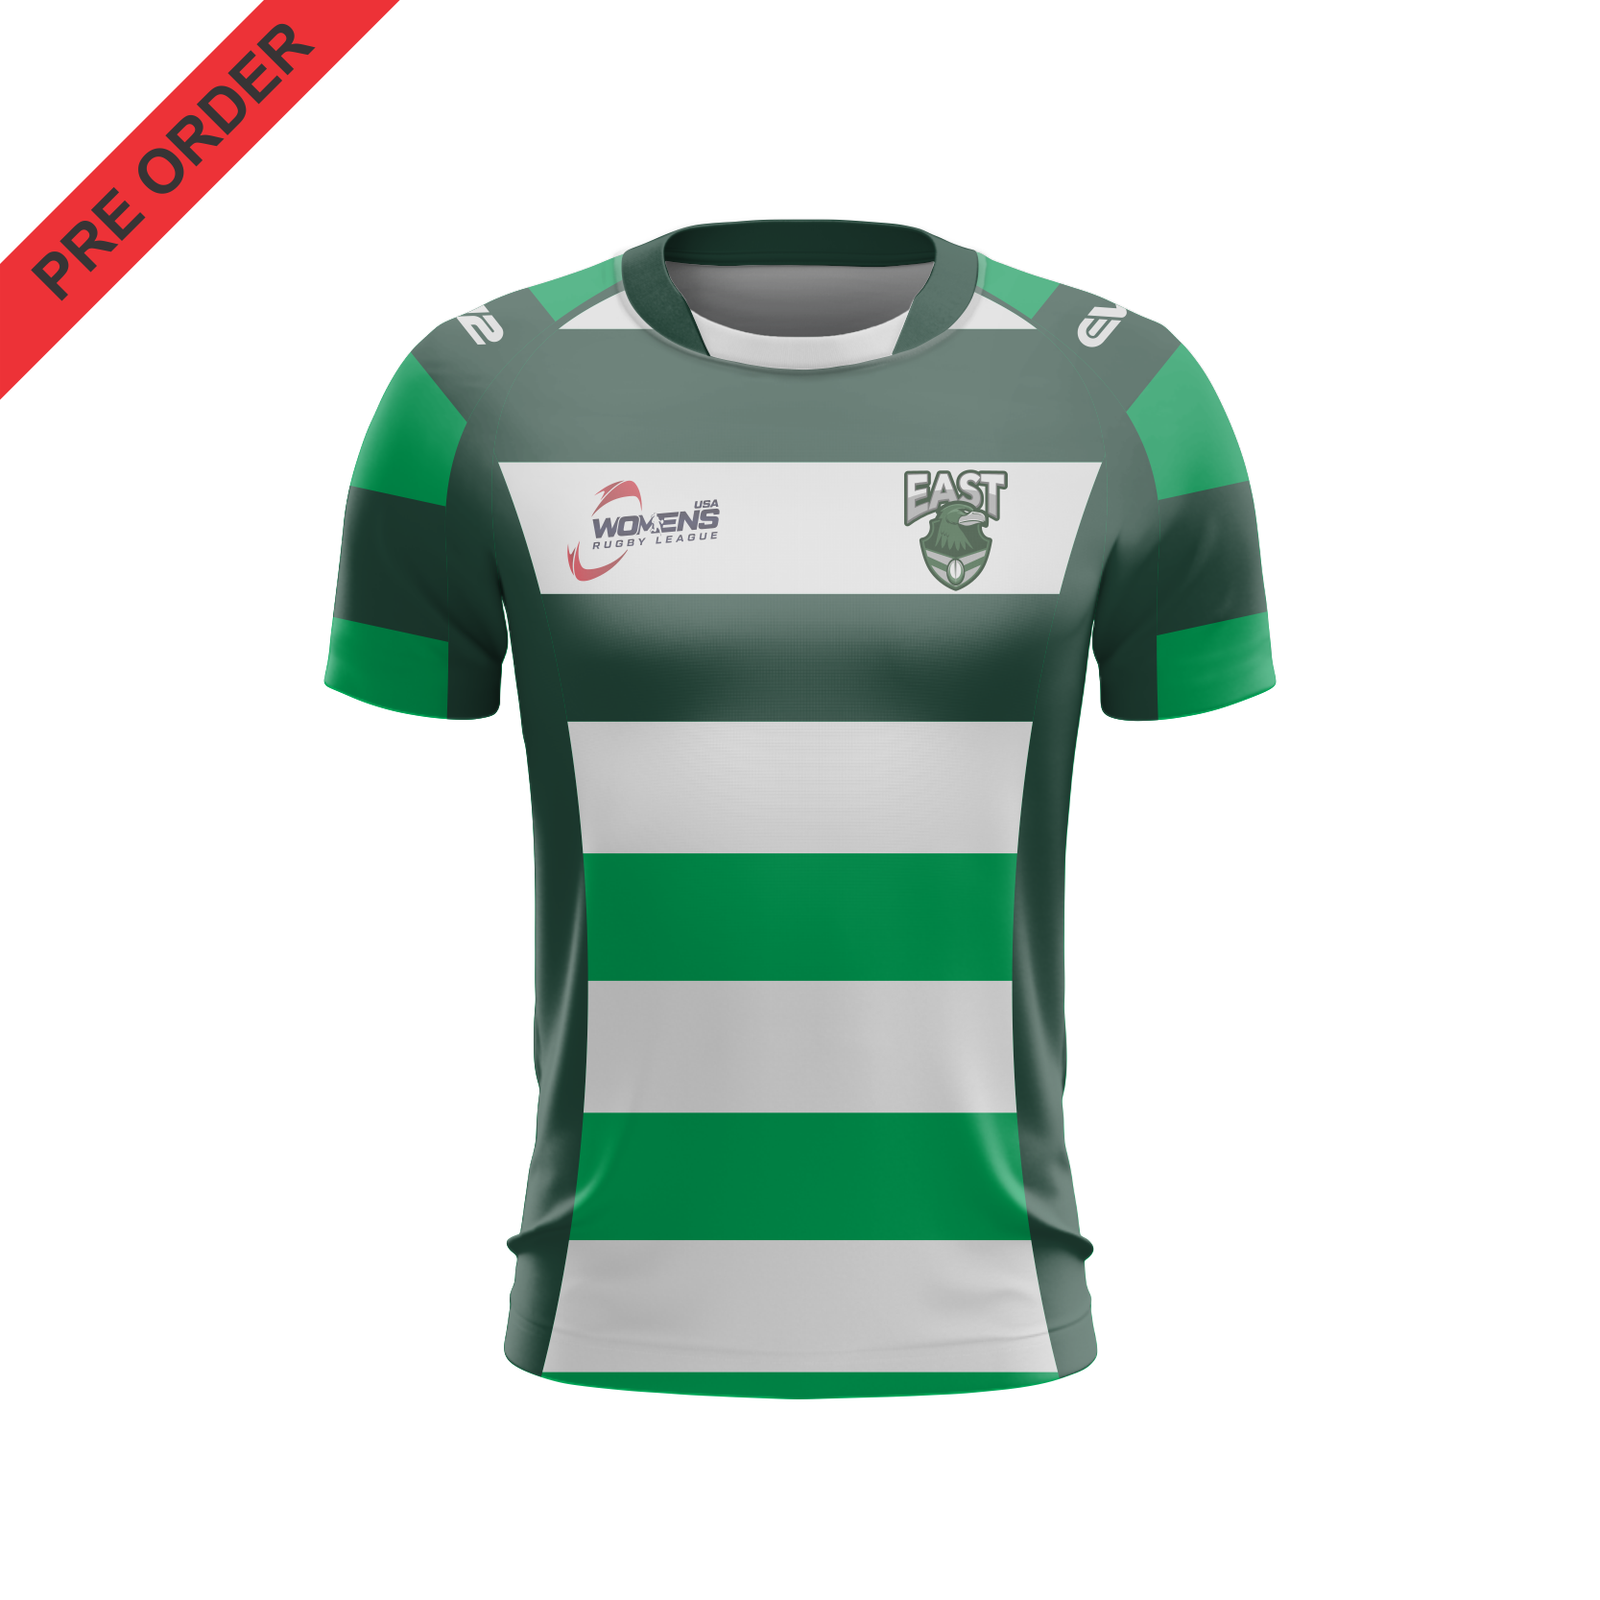 Easts Rugby League - Nines Jersey